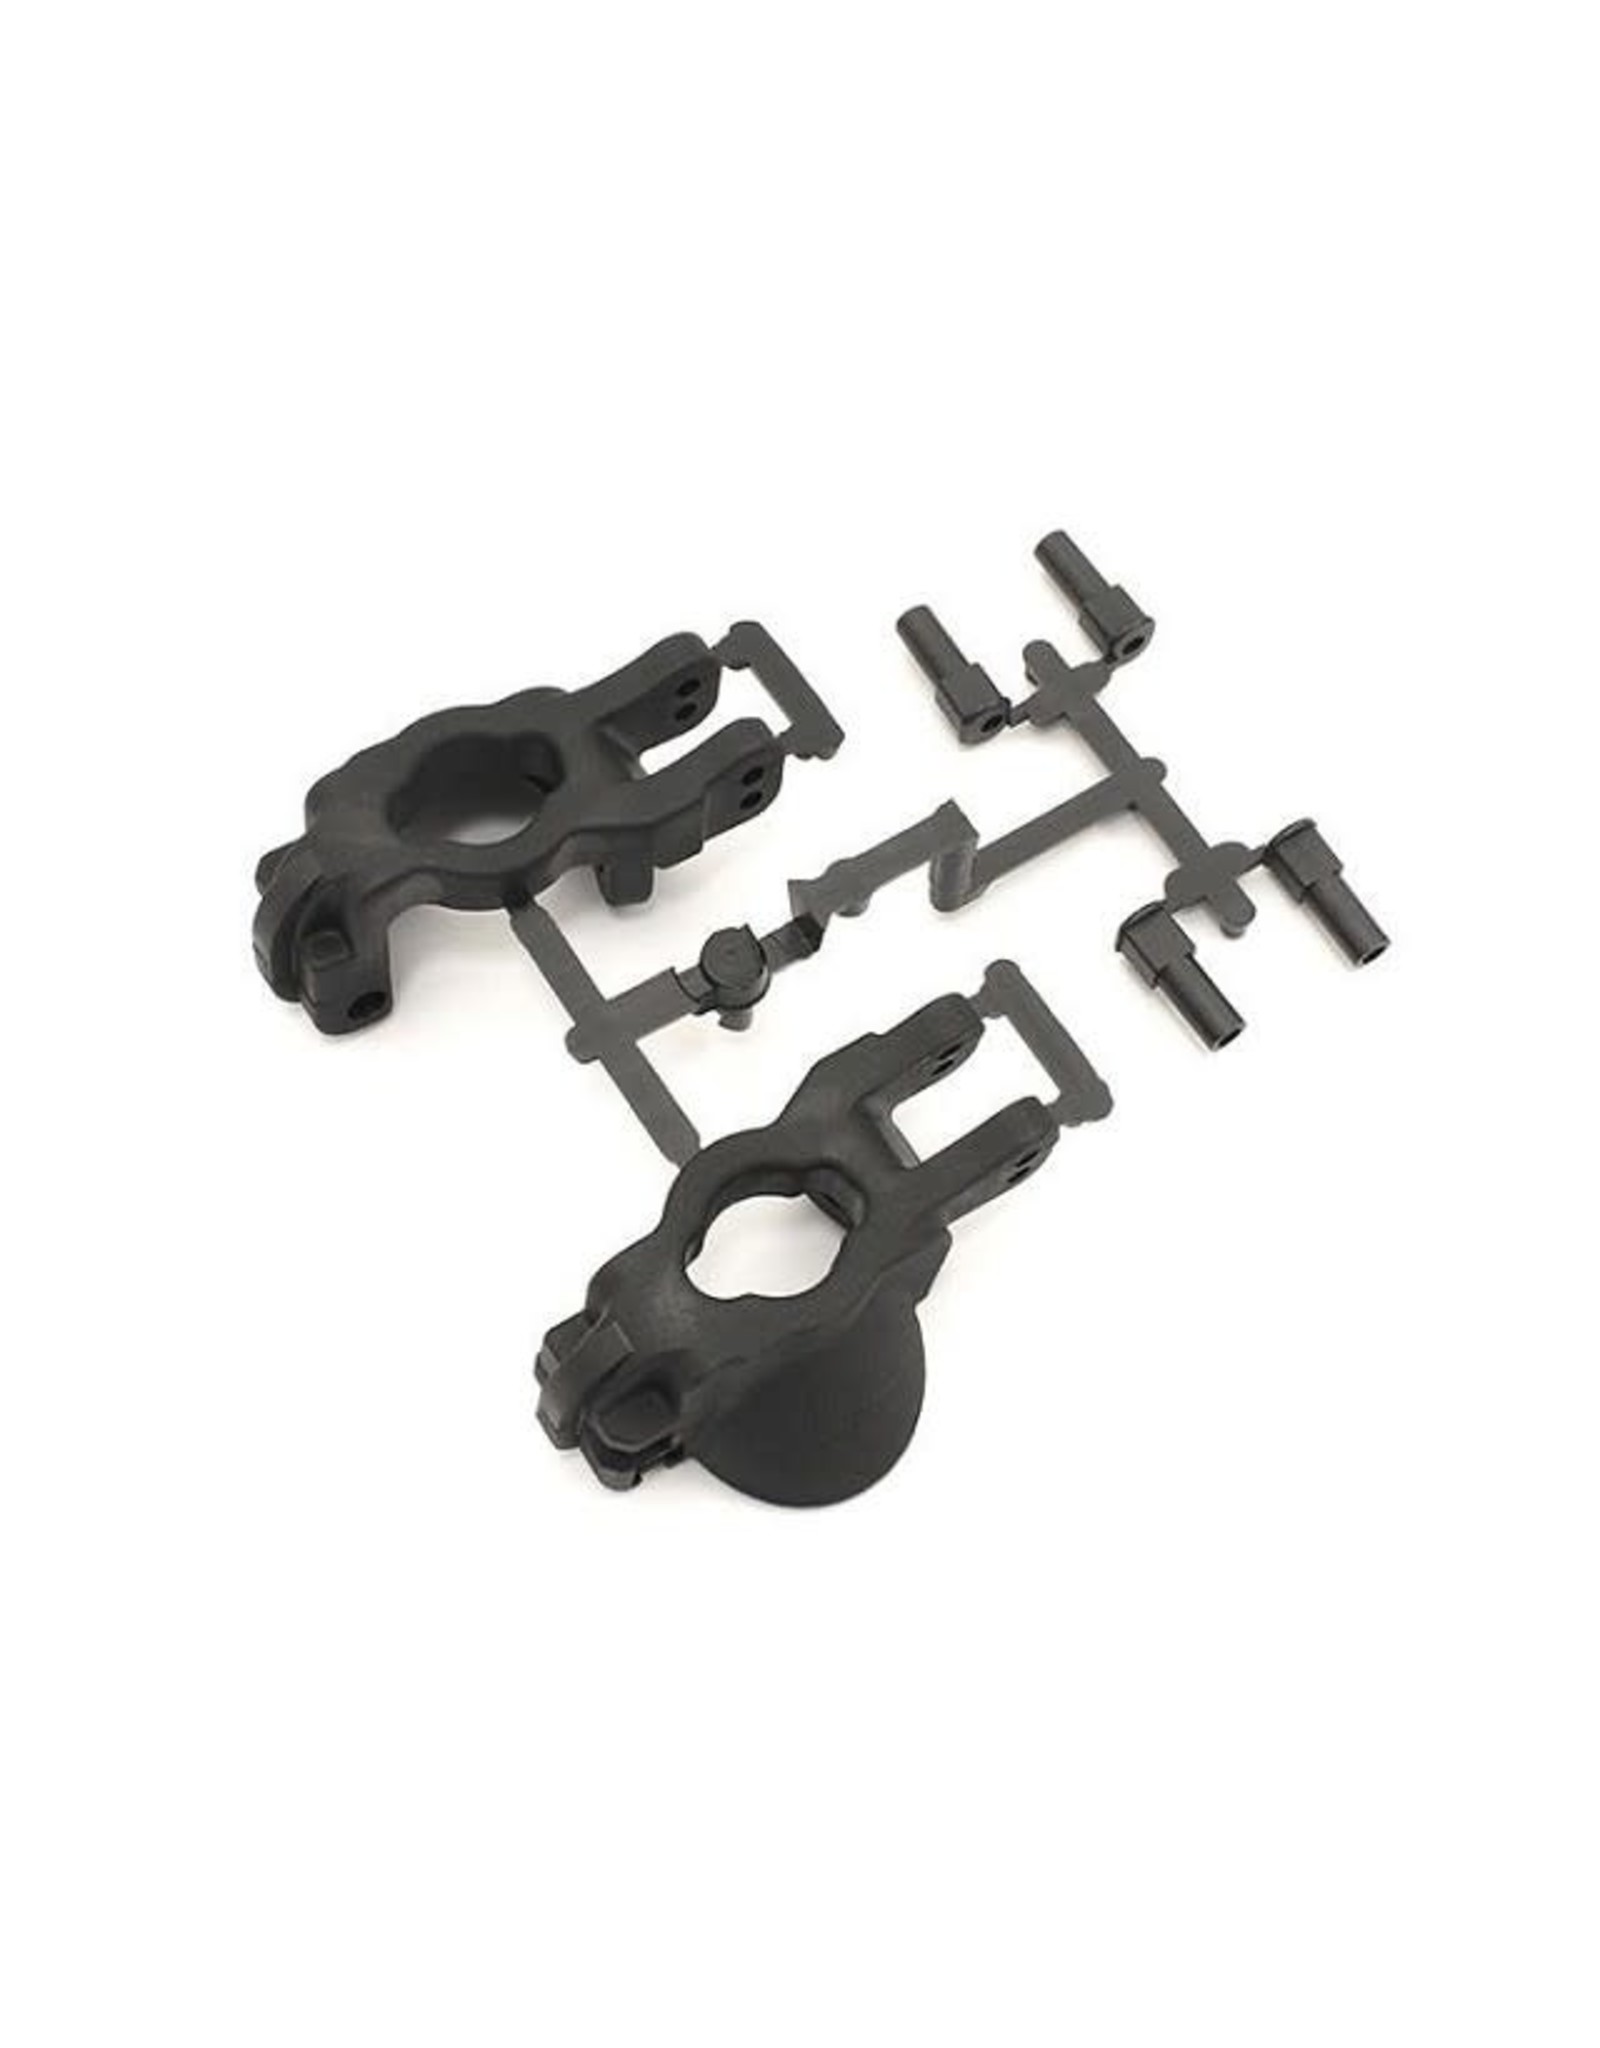 Kyosho IFW468B Front Hub Carrier Set(L,R/17.5°/MP9)